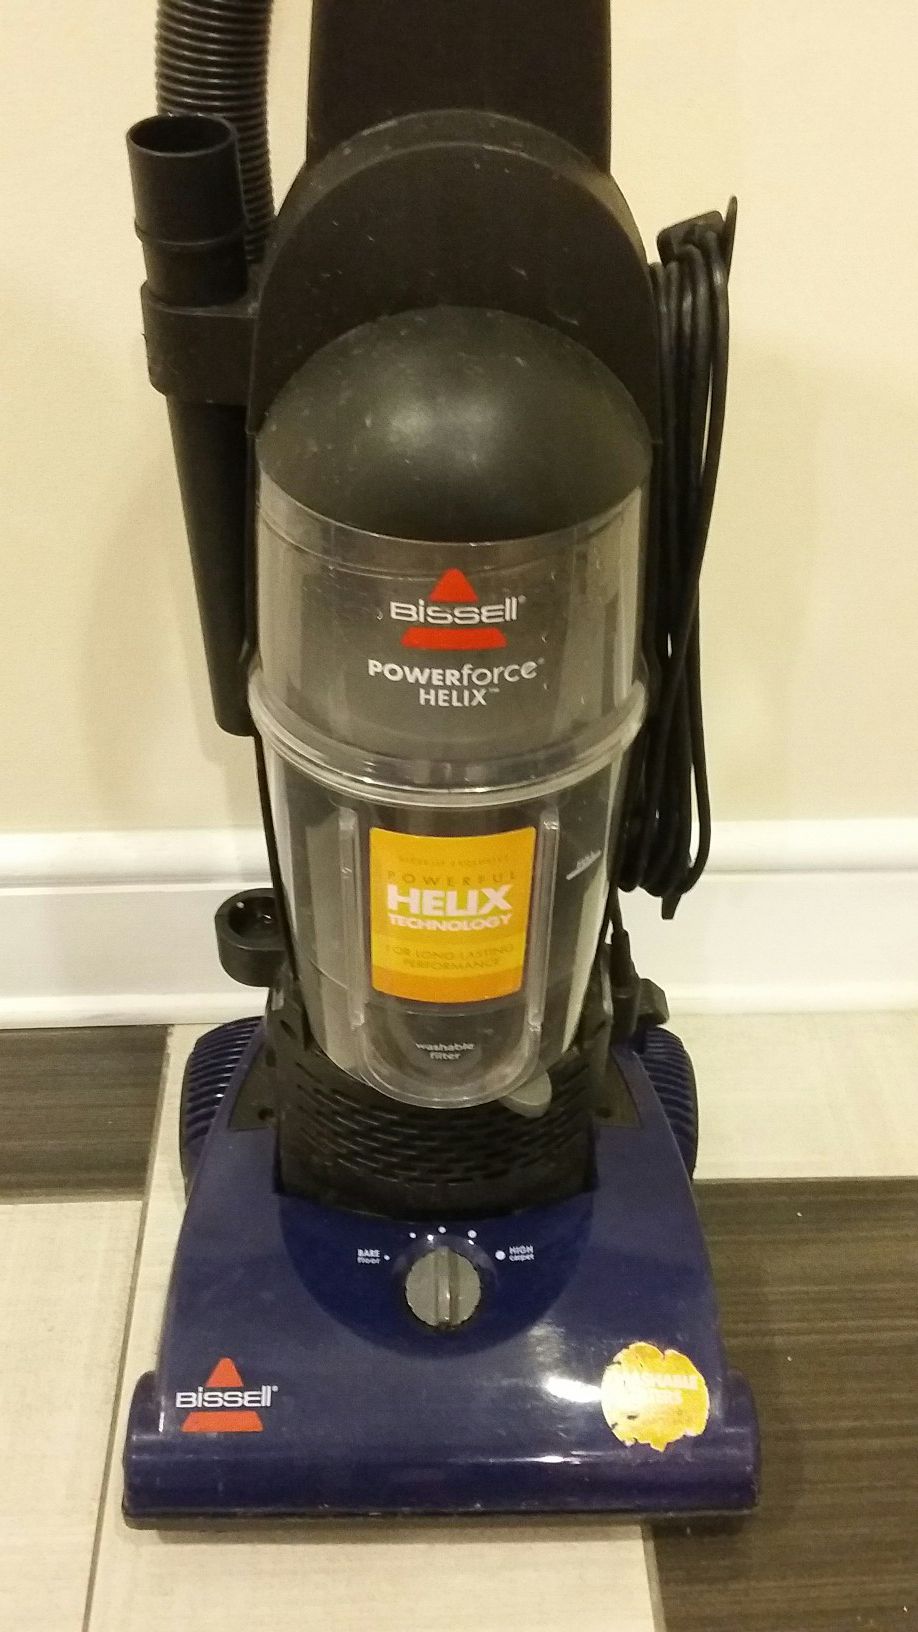 NICE BISSELL POWERFORCE HELIX TECHNOLOGY FOR LONG LASTING PERFORMANCE BAGLESS VACUUM CLEANER WITH WASHABLE FILTER, EXCELLENT CONDITION